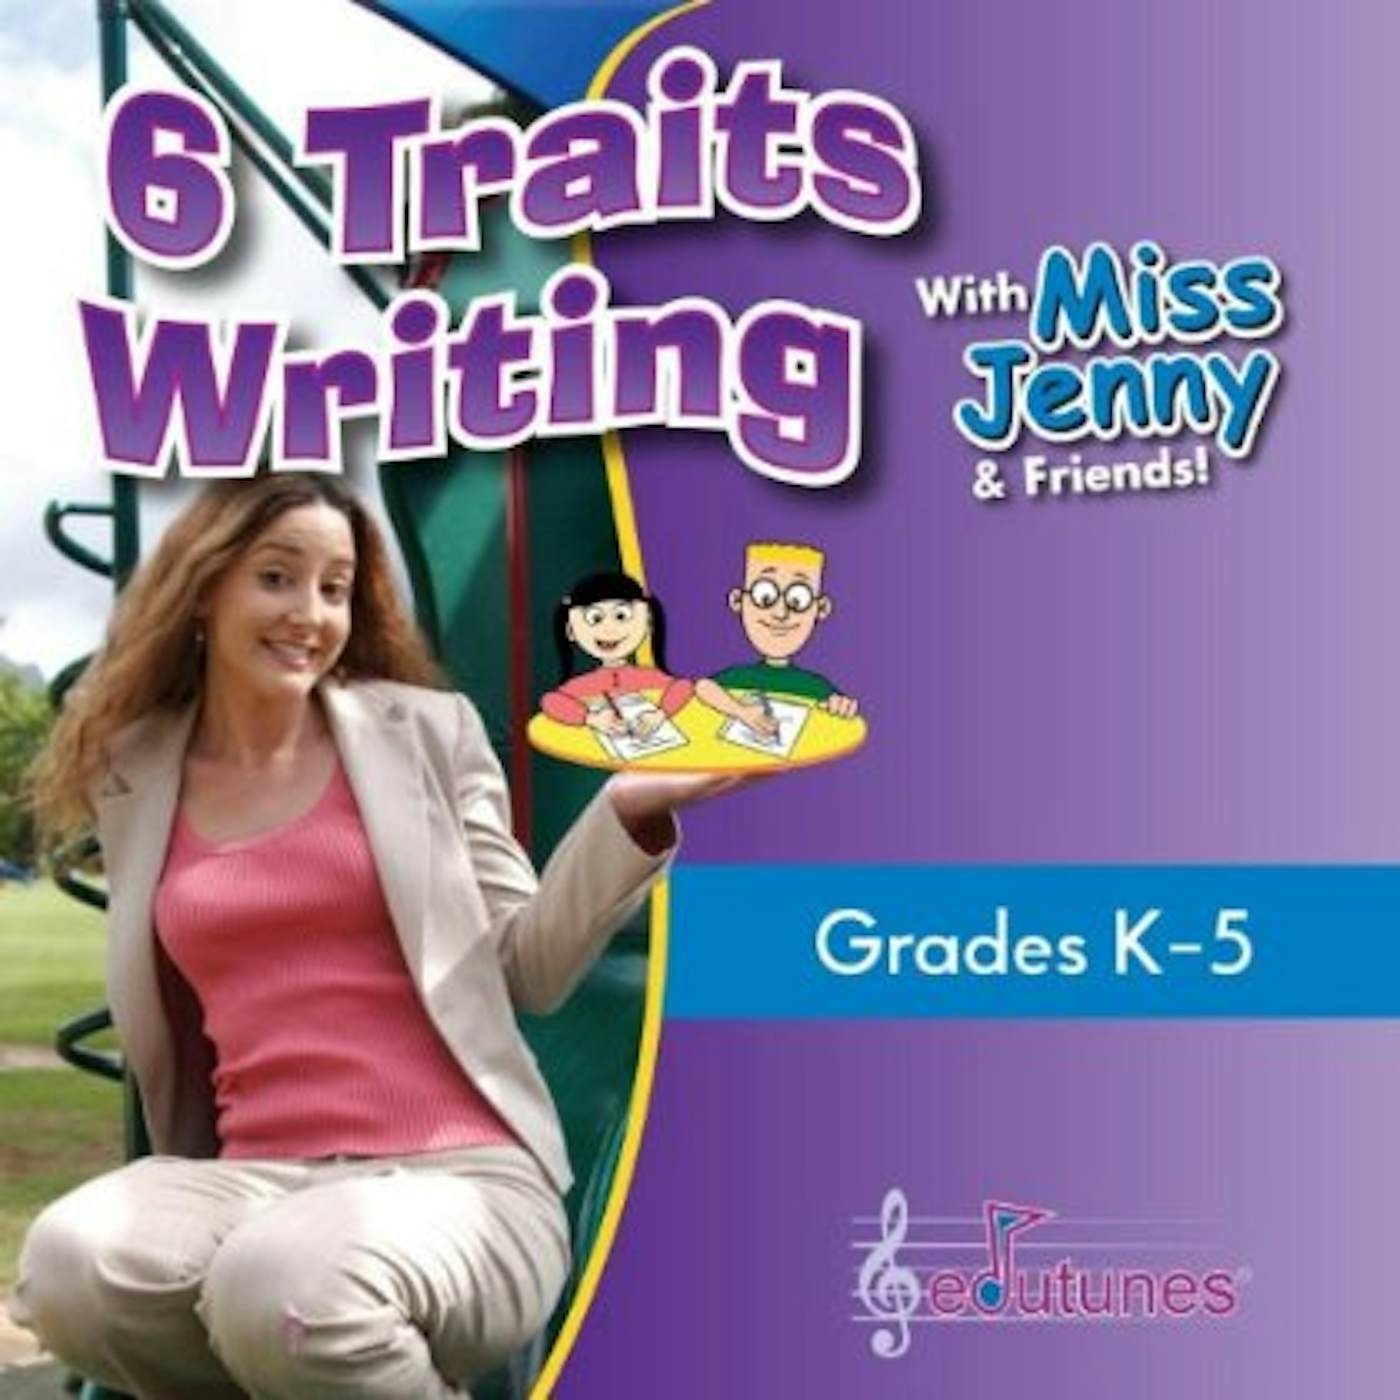 6 TRAITS WRITING WITH MISS JENNY & FRIENDS CD